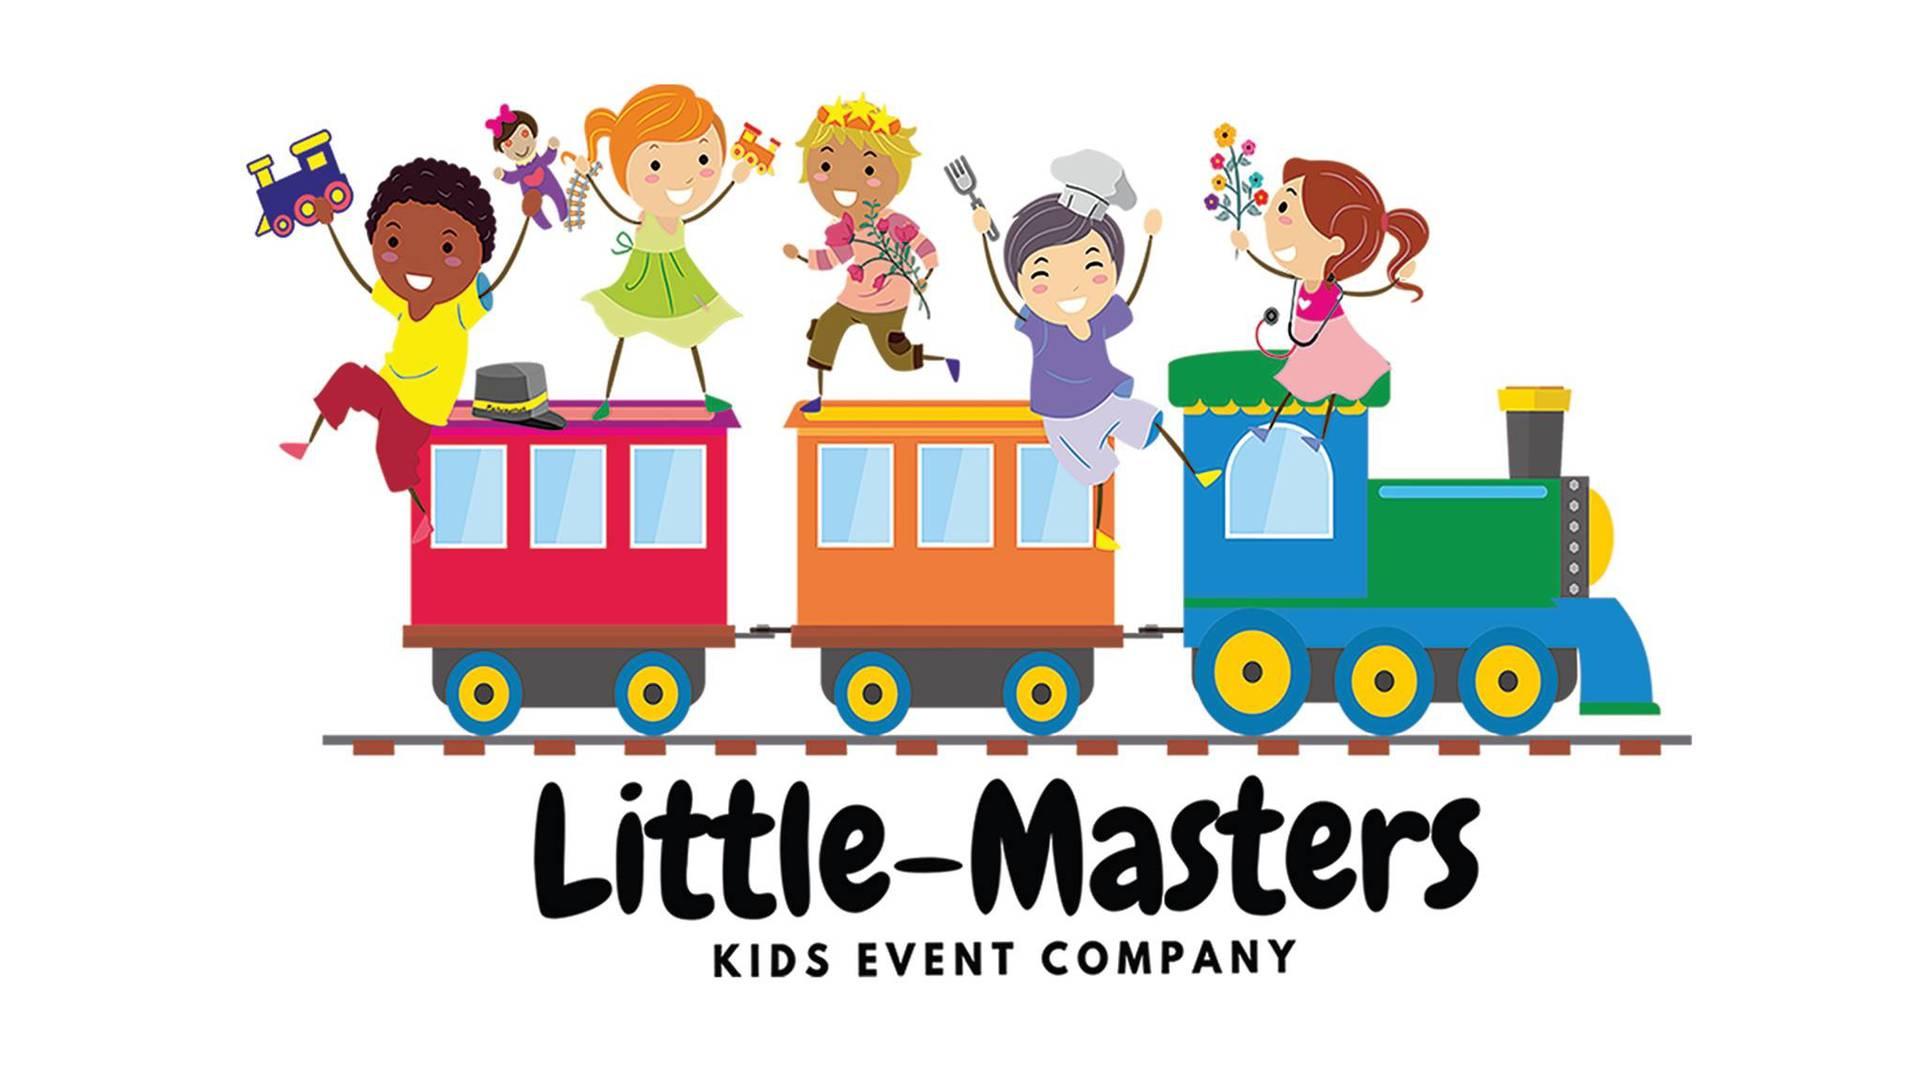 Little-Masters Kids Event Company photo